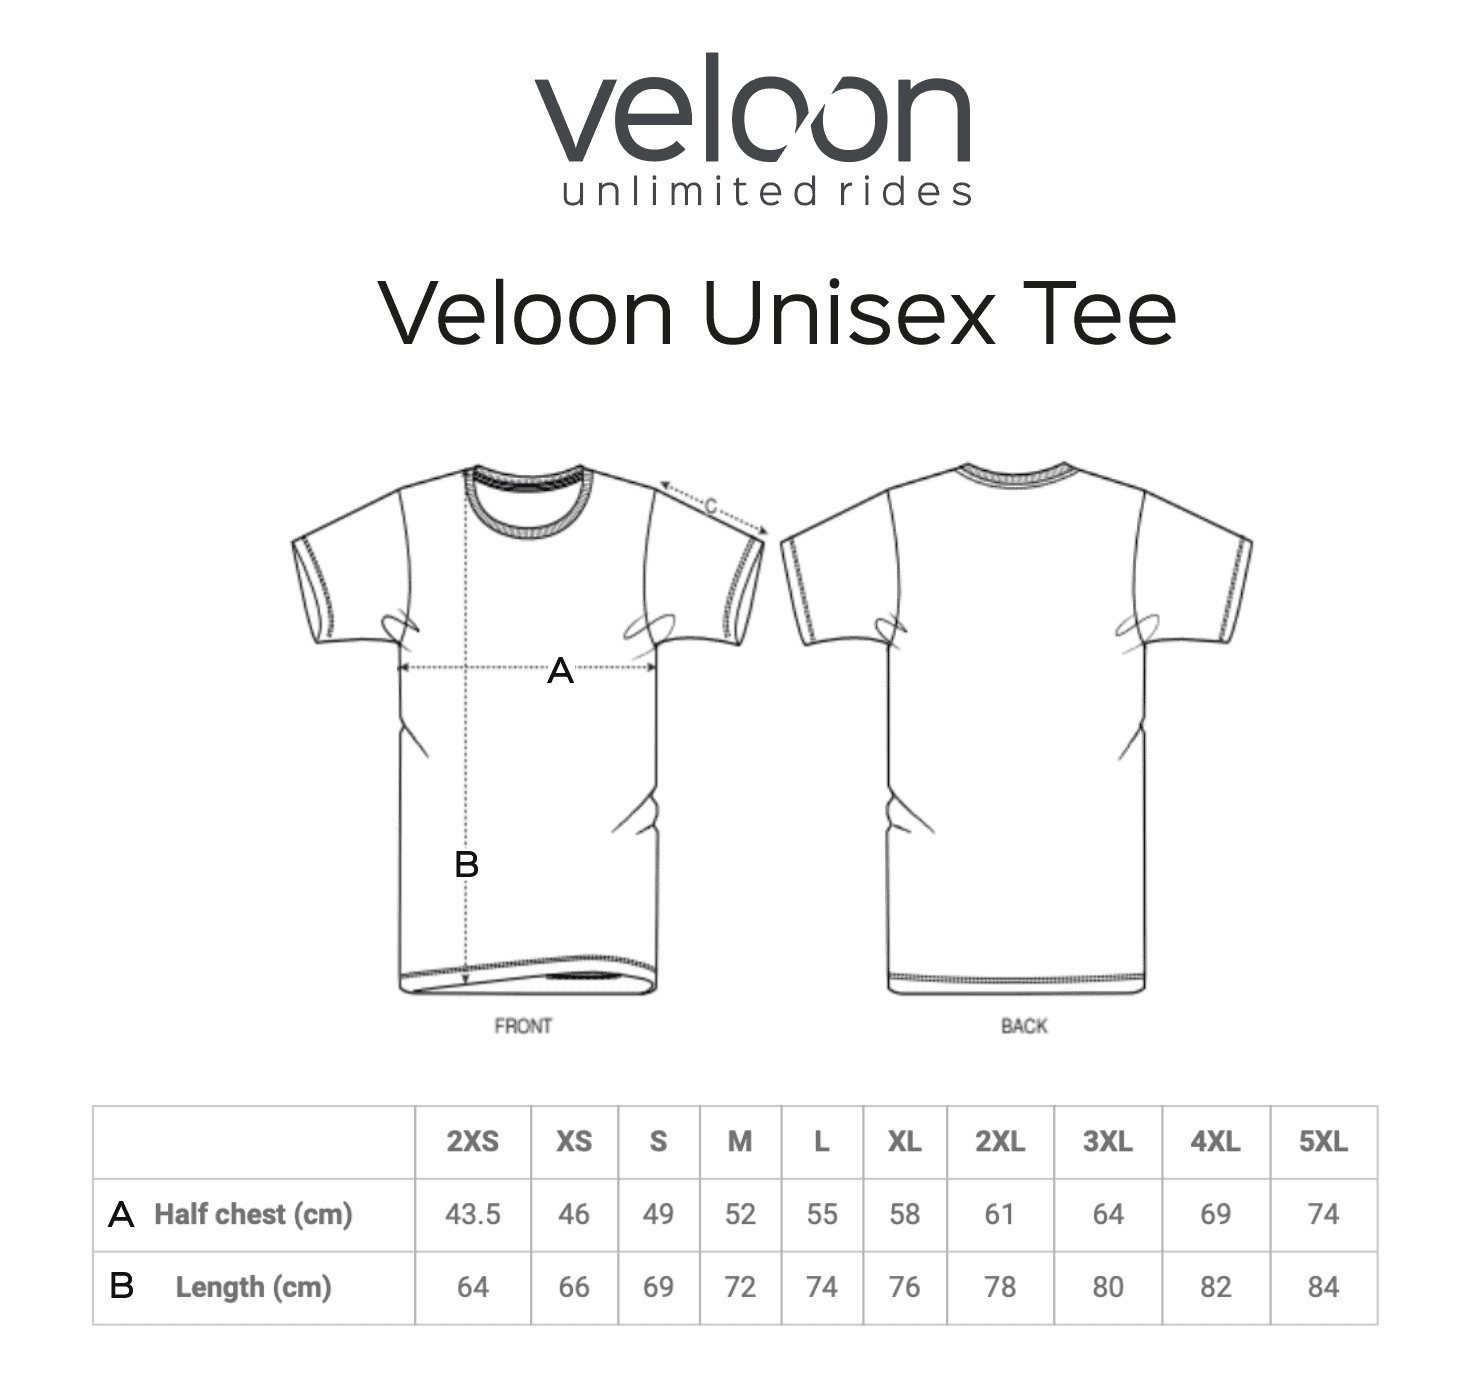 Unlimited Veloon Rides Pink T-Shirt